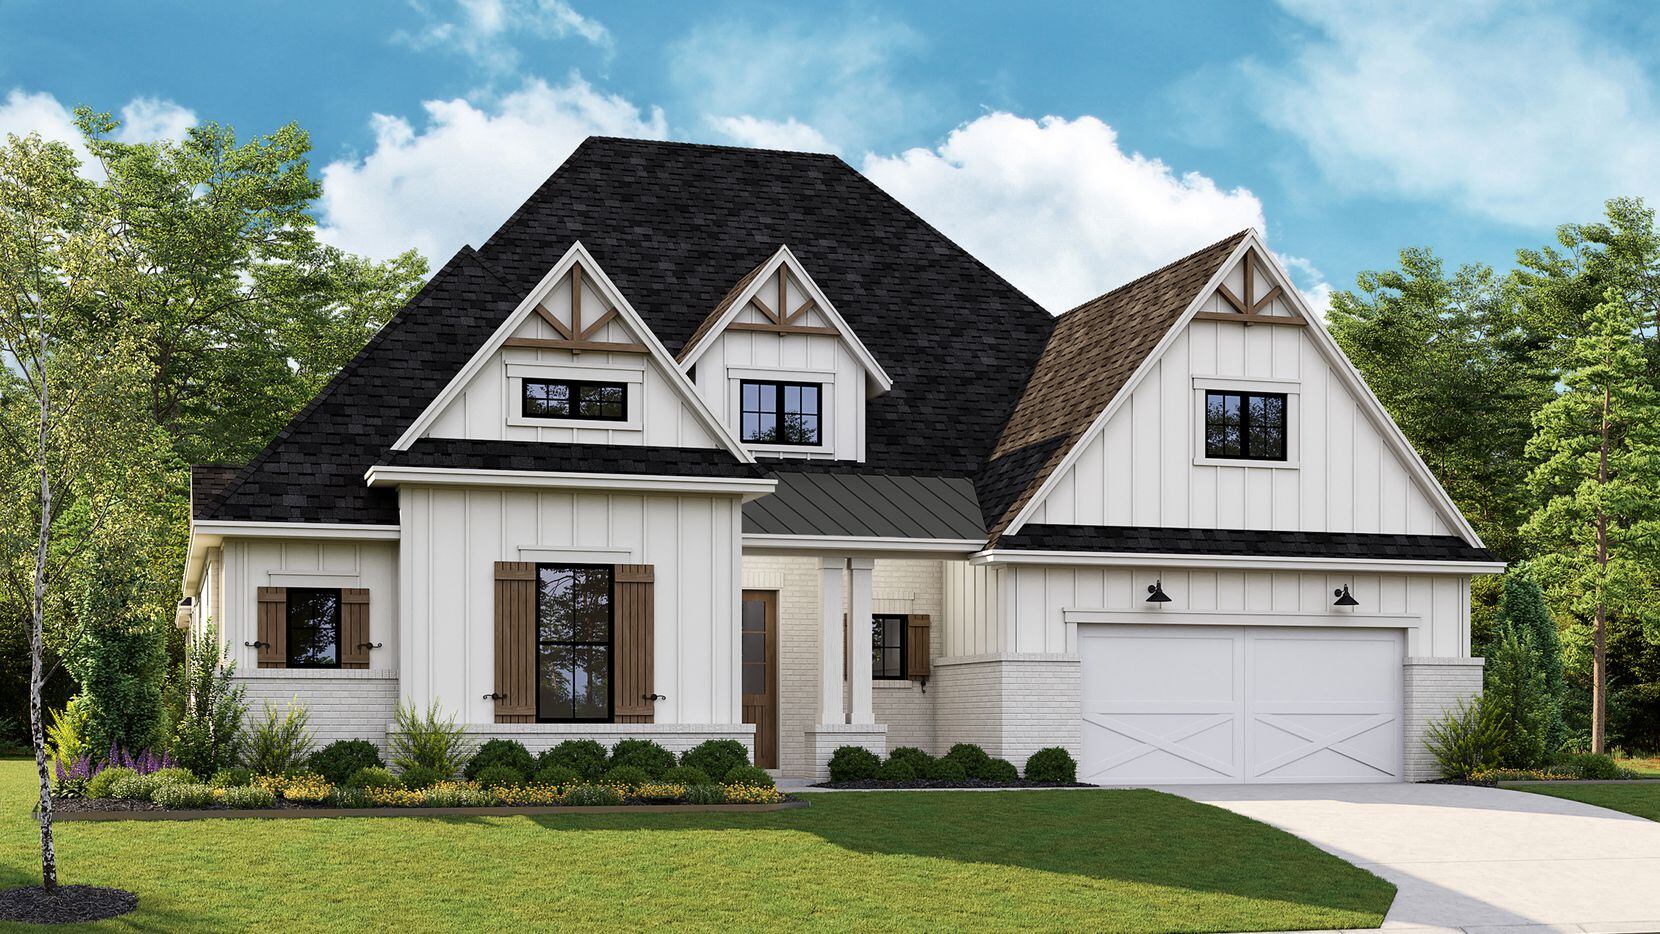 This is a rendering of one of the new luxury patio homes by Tradition Homes now open in...